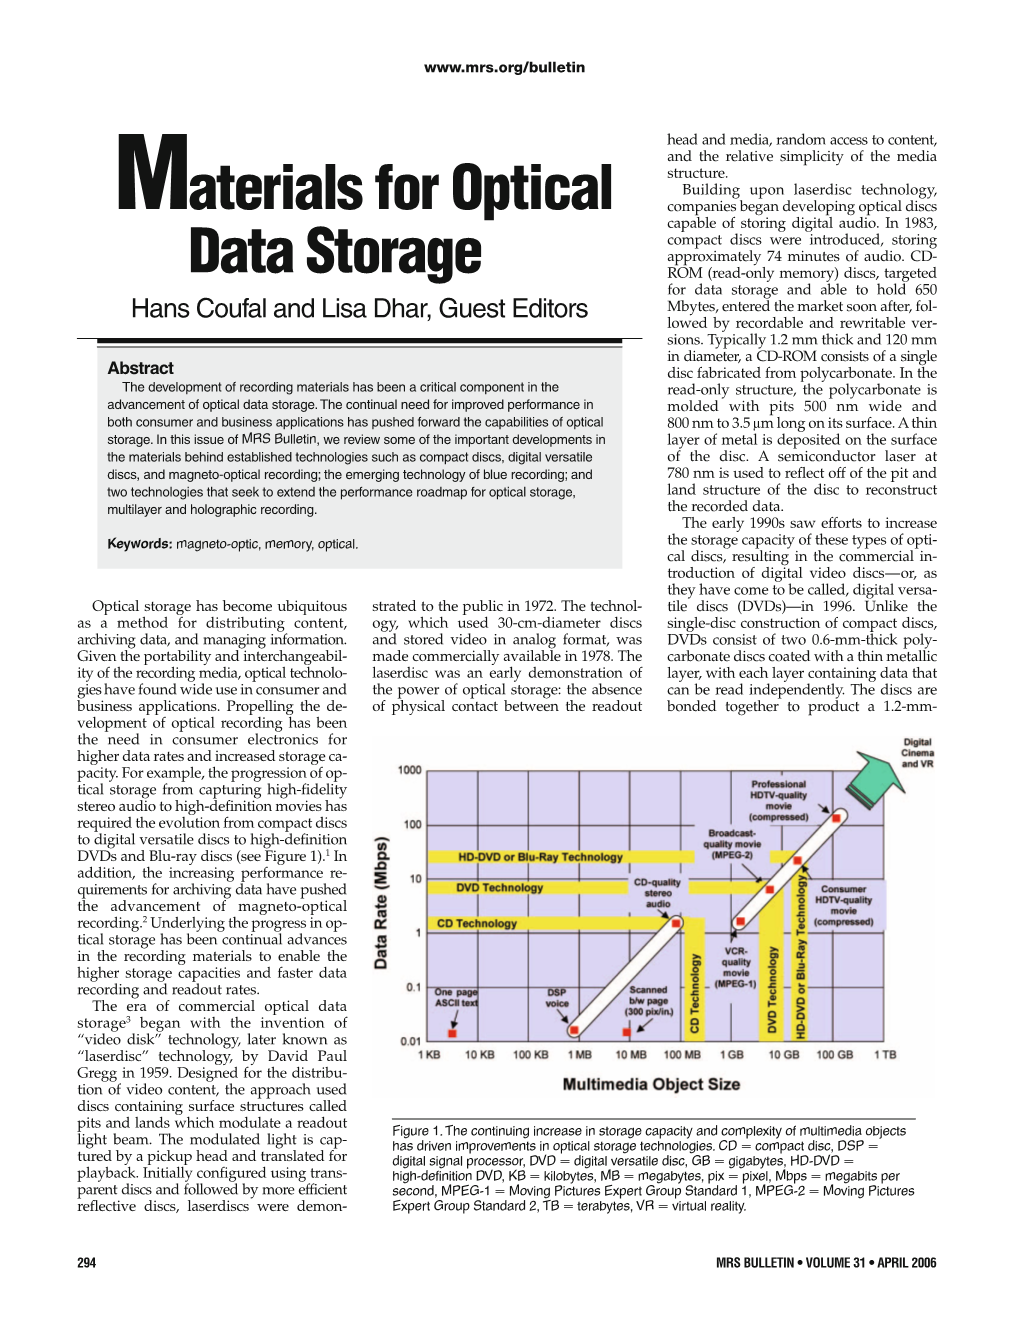 Materials for Optical Data Storage